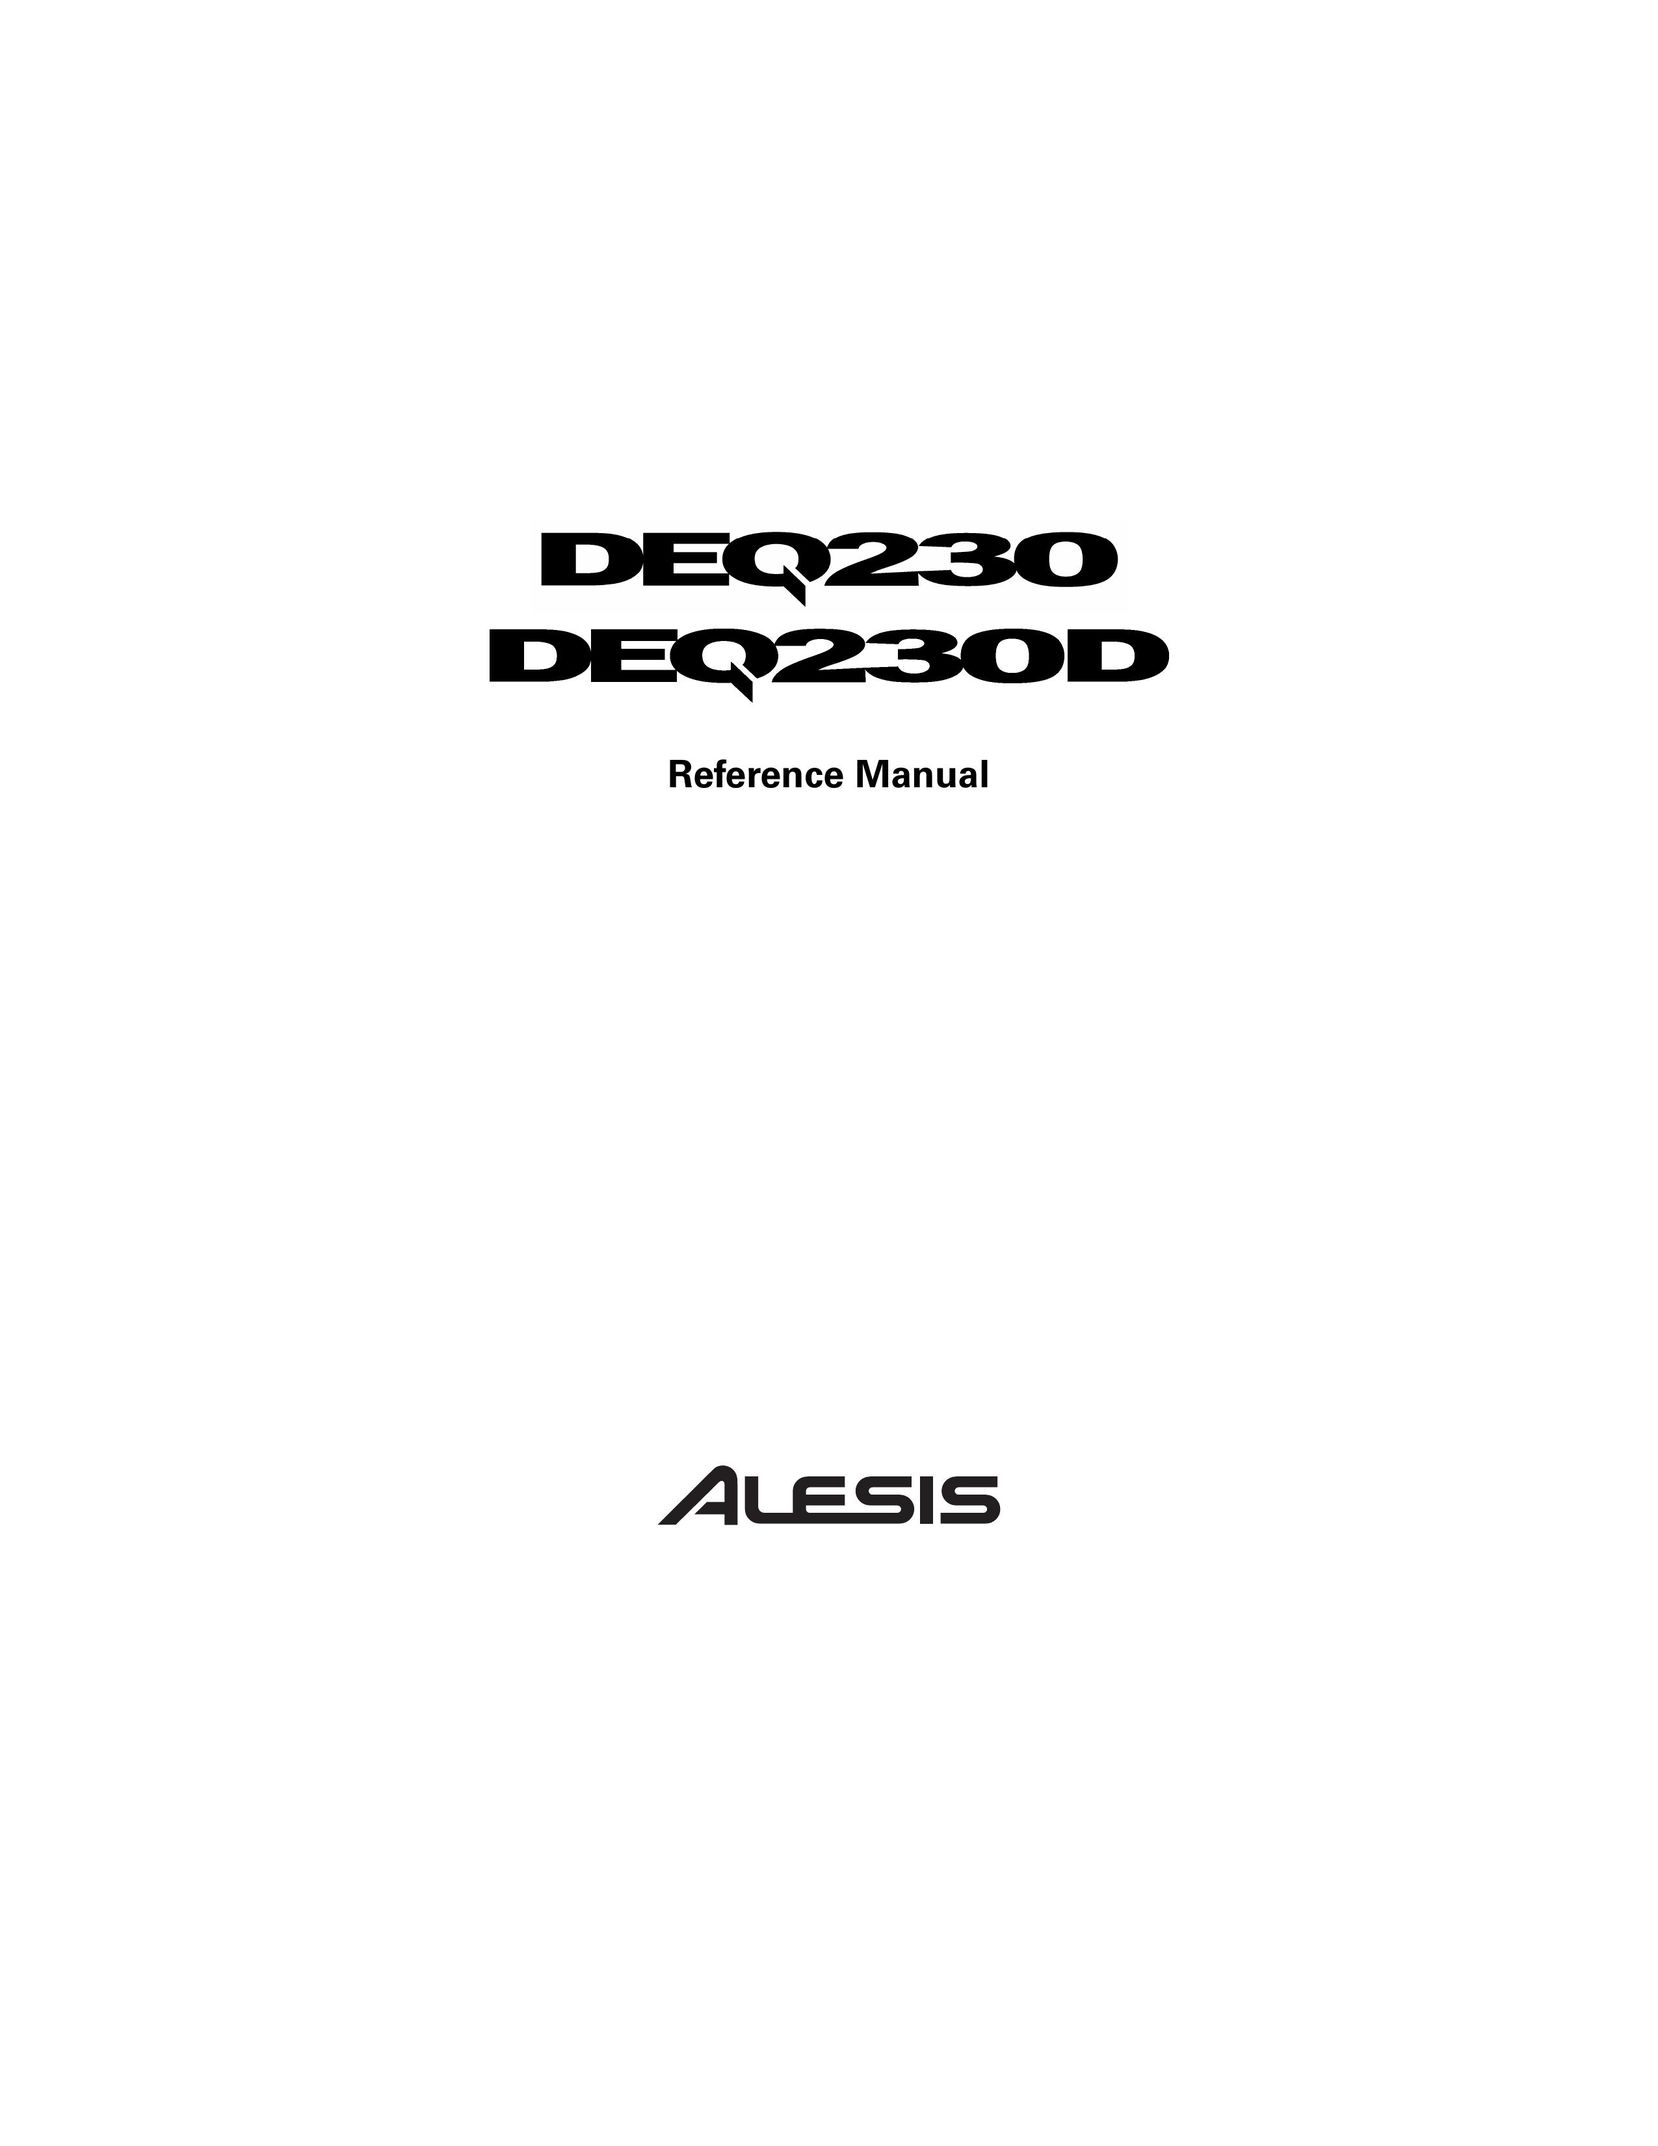 Alesis DEQ230 Stereo Equalizer User Manual